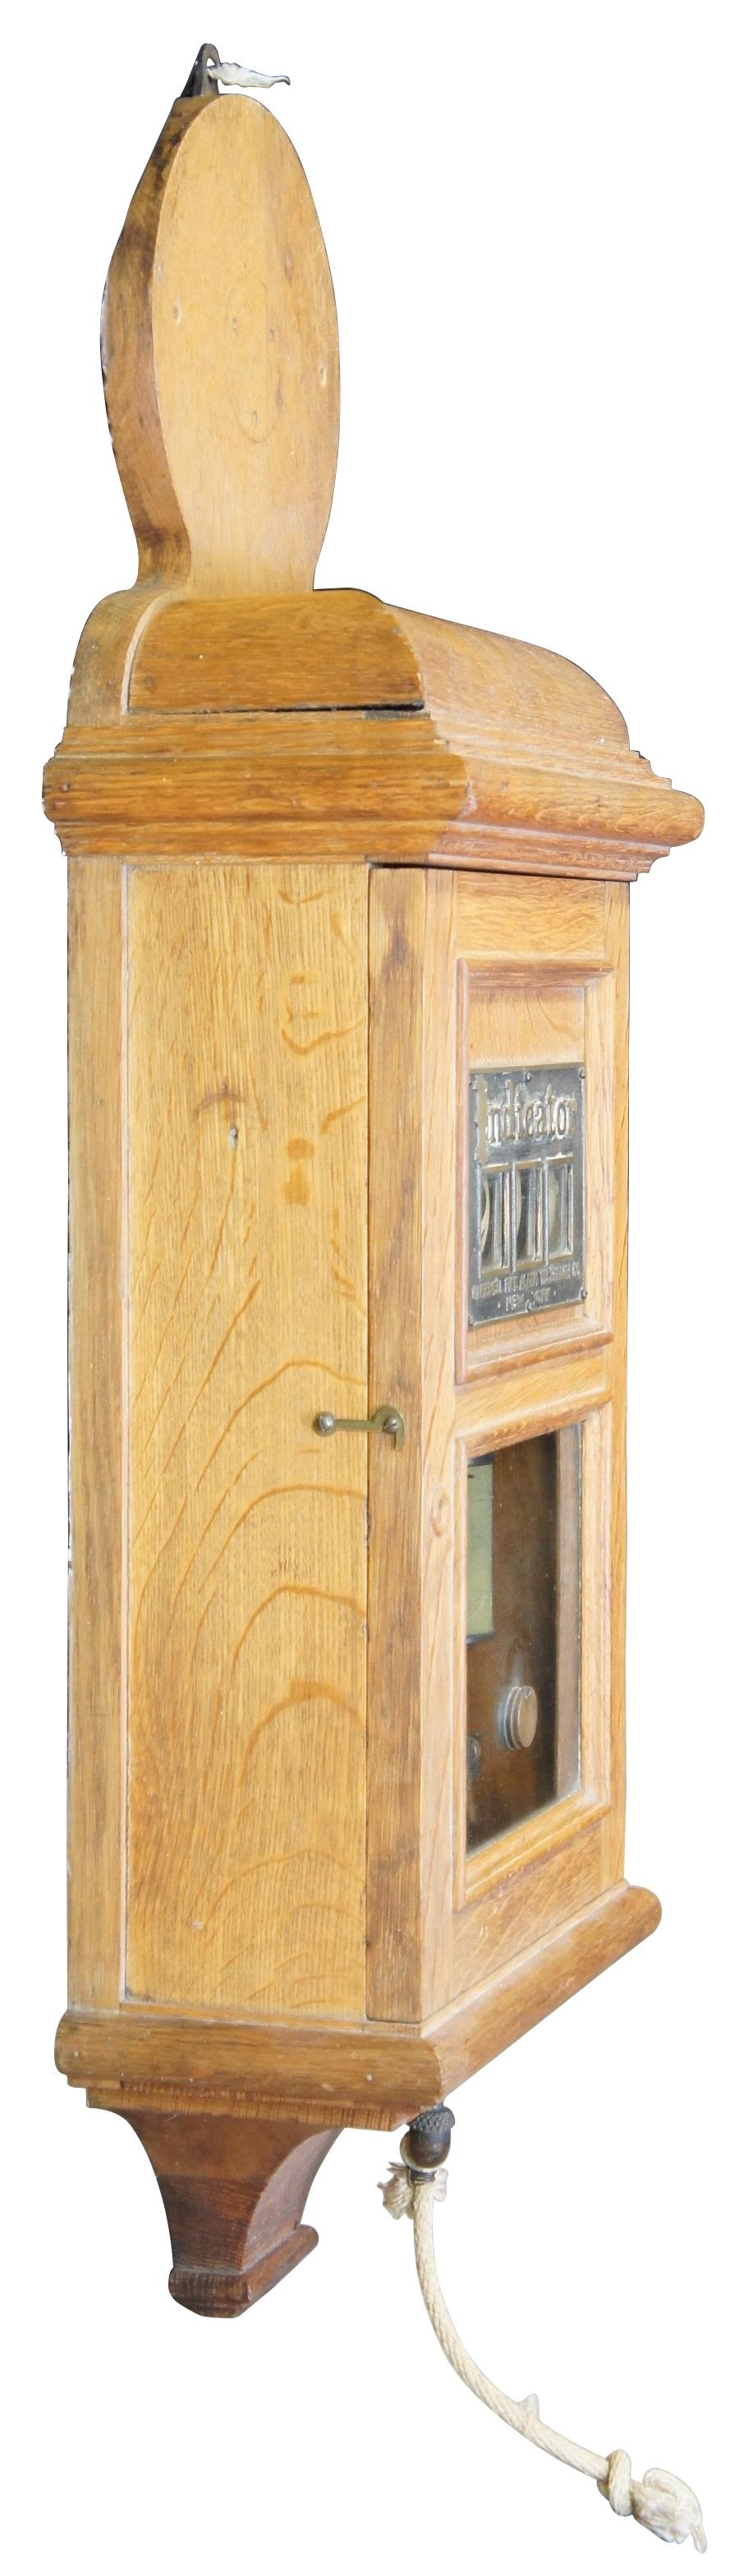 Quartersawn Oak Gamewell Fire Alarm Indicator box, circa 1888. Made by the Gamewell Fire Alarm Company of New York used in fire houses to indicate the fire alarm box number pulled for a fire.